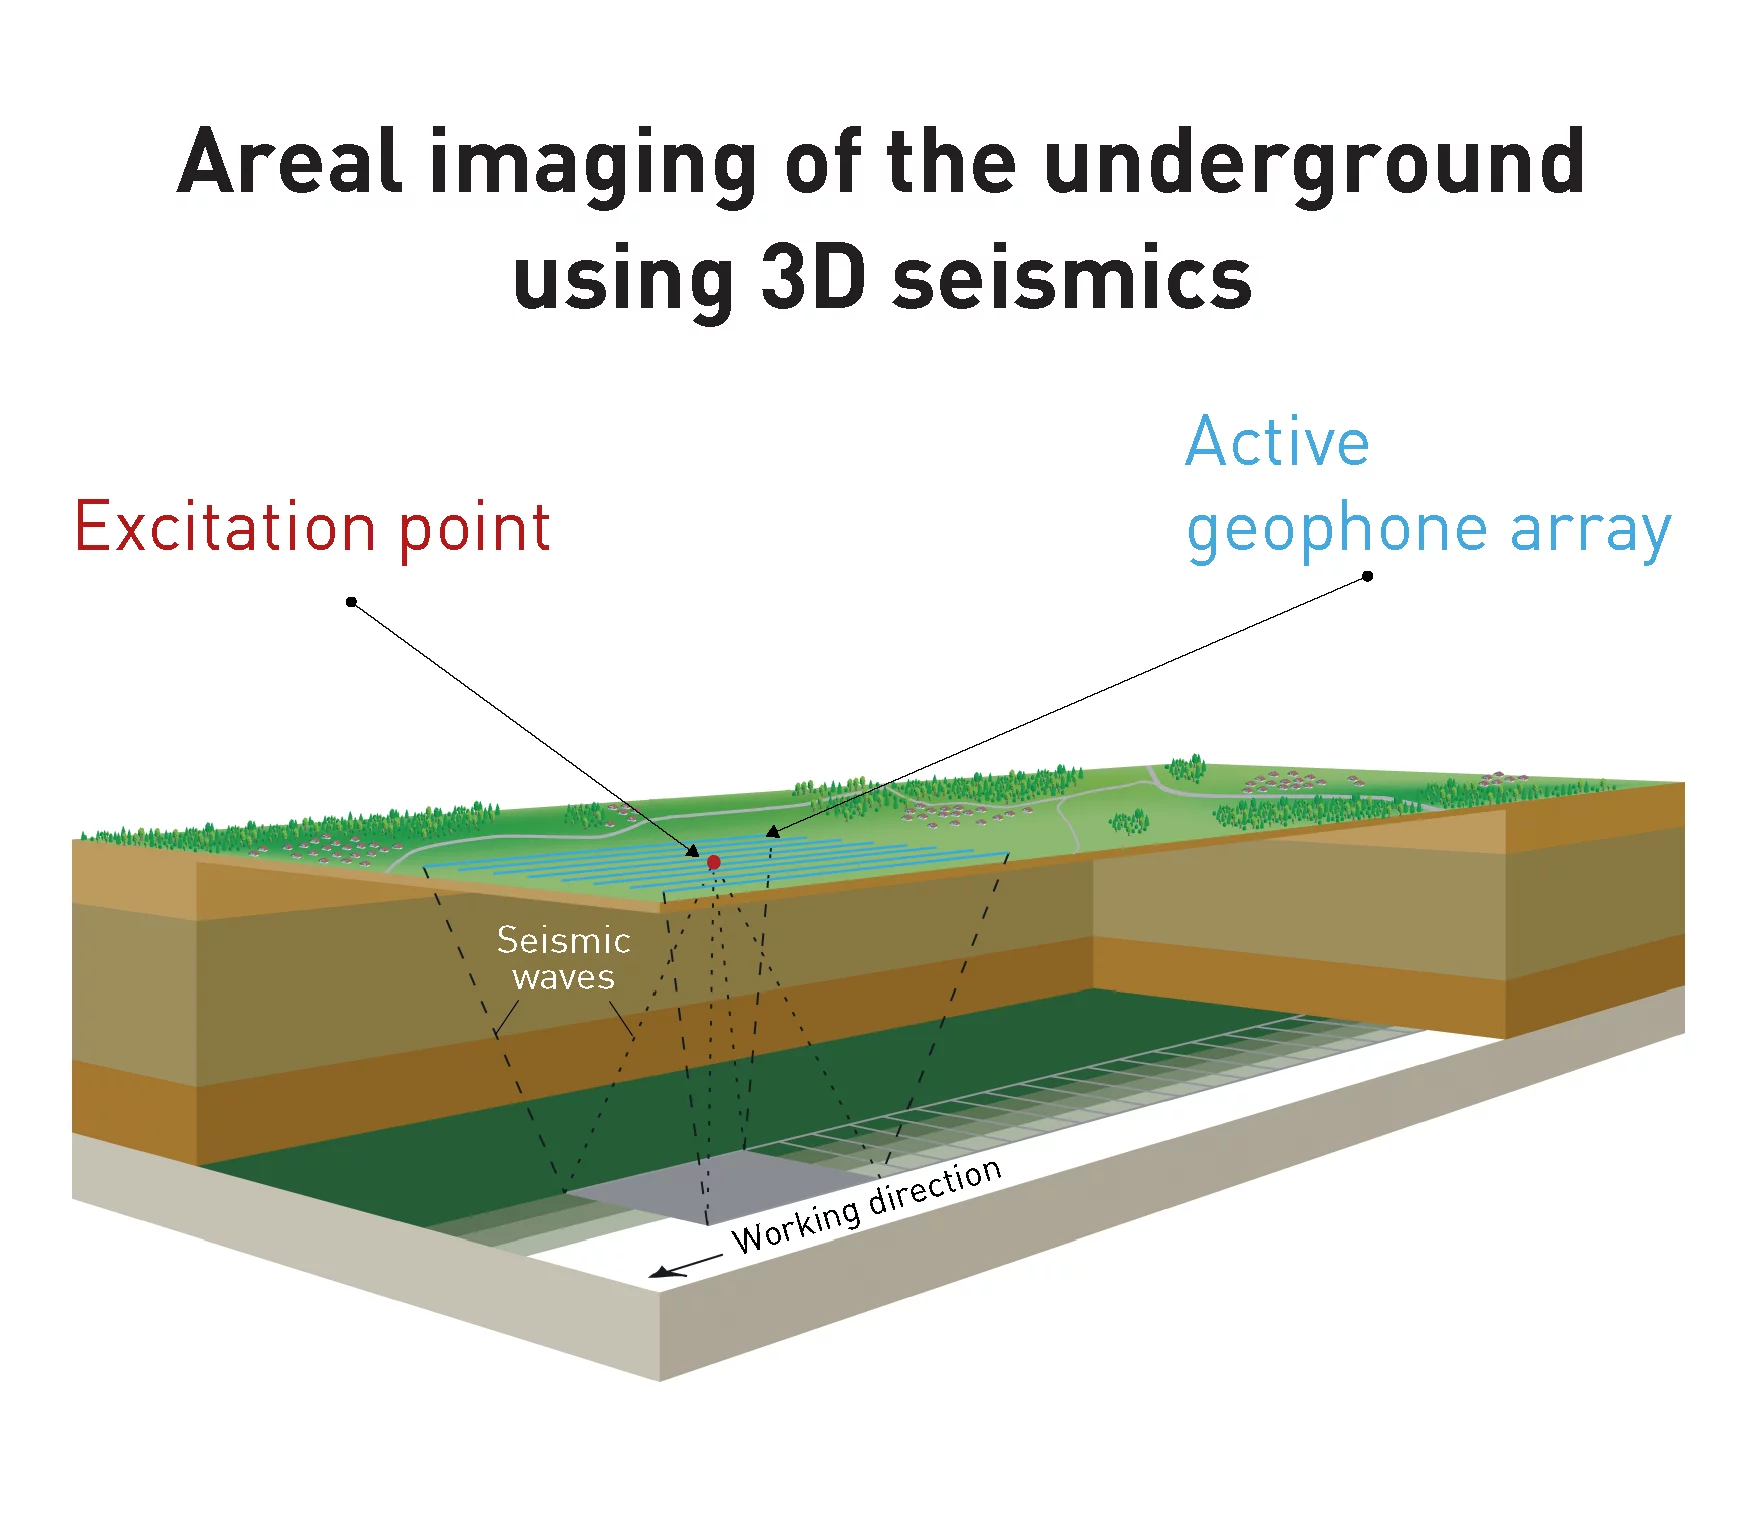 How does 3D seismic surveying work? The underground of a certain area is analysed on the basis of a net of partly overlapping segments. These segments are schematically shown at the interface of a rock layer. The waves that are simultaneously reflected from the interfaces of each over- and underlying rock layer over a depth of several hundreds of metres deliver a three-dimensional image of the underground. Illustration: Nagra